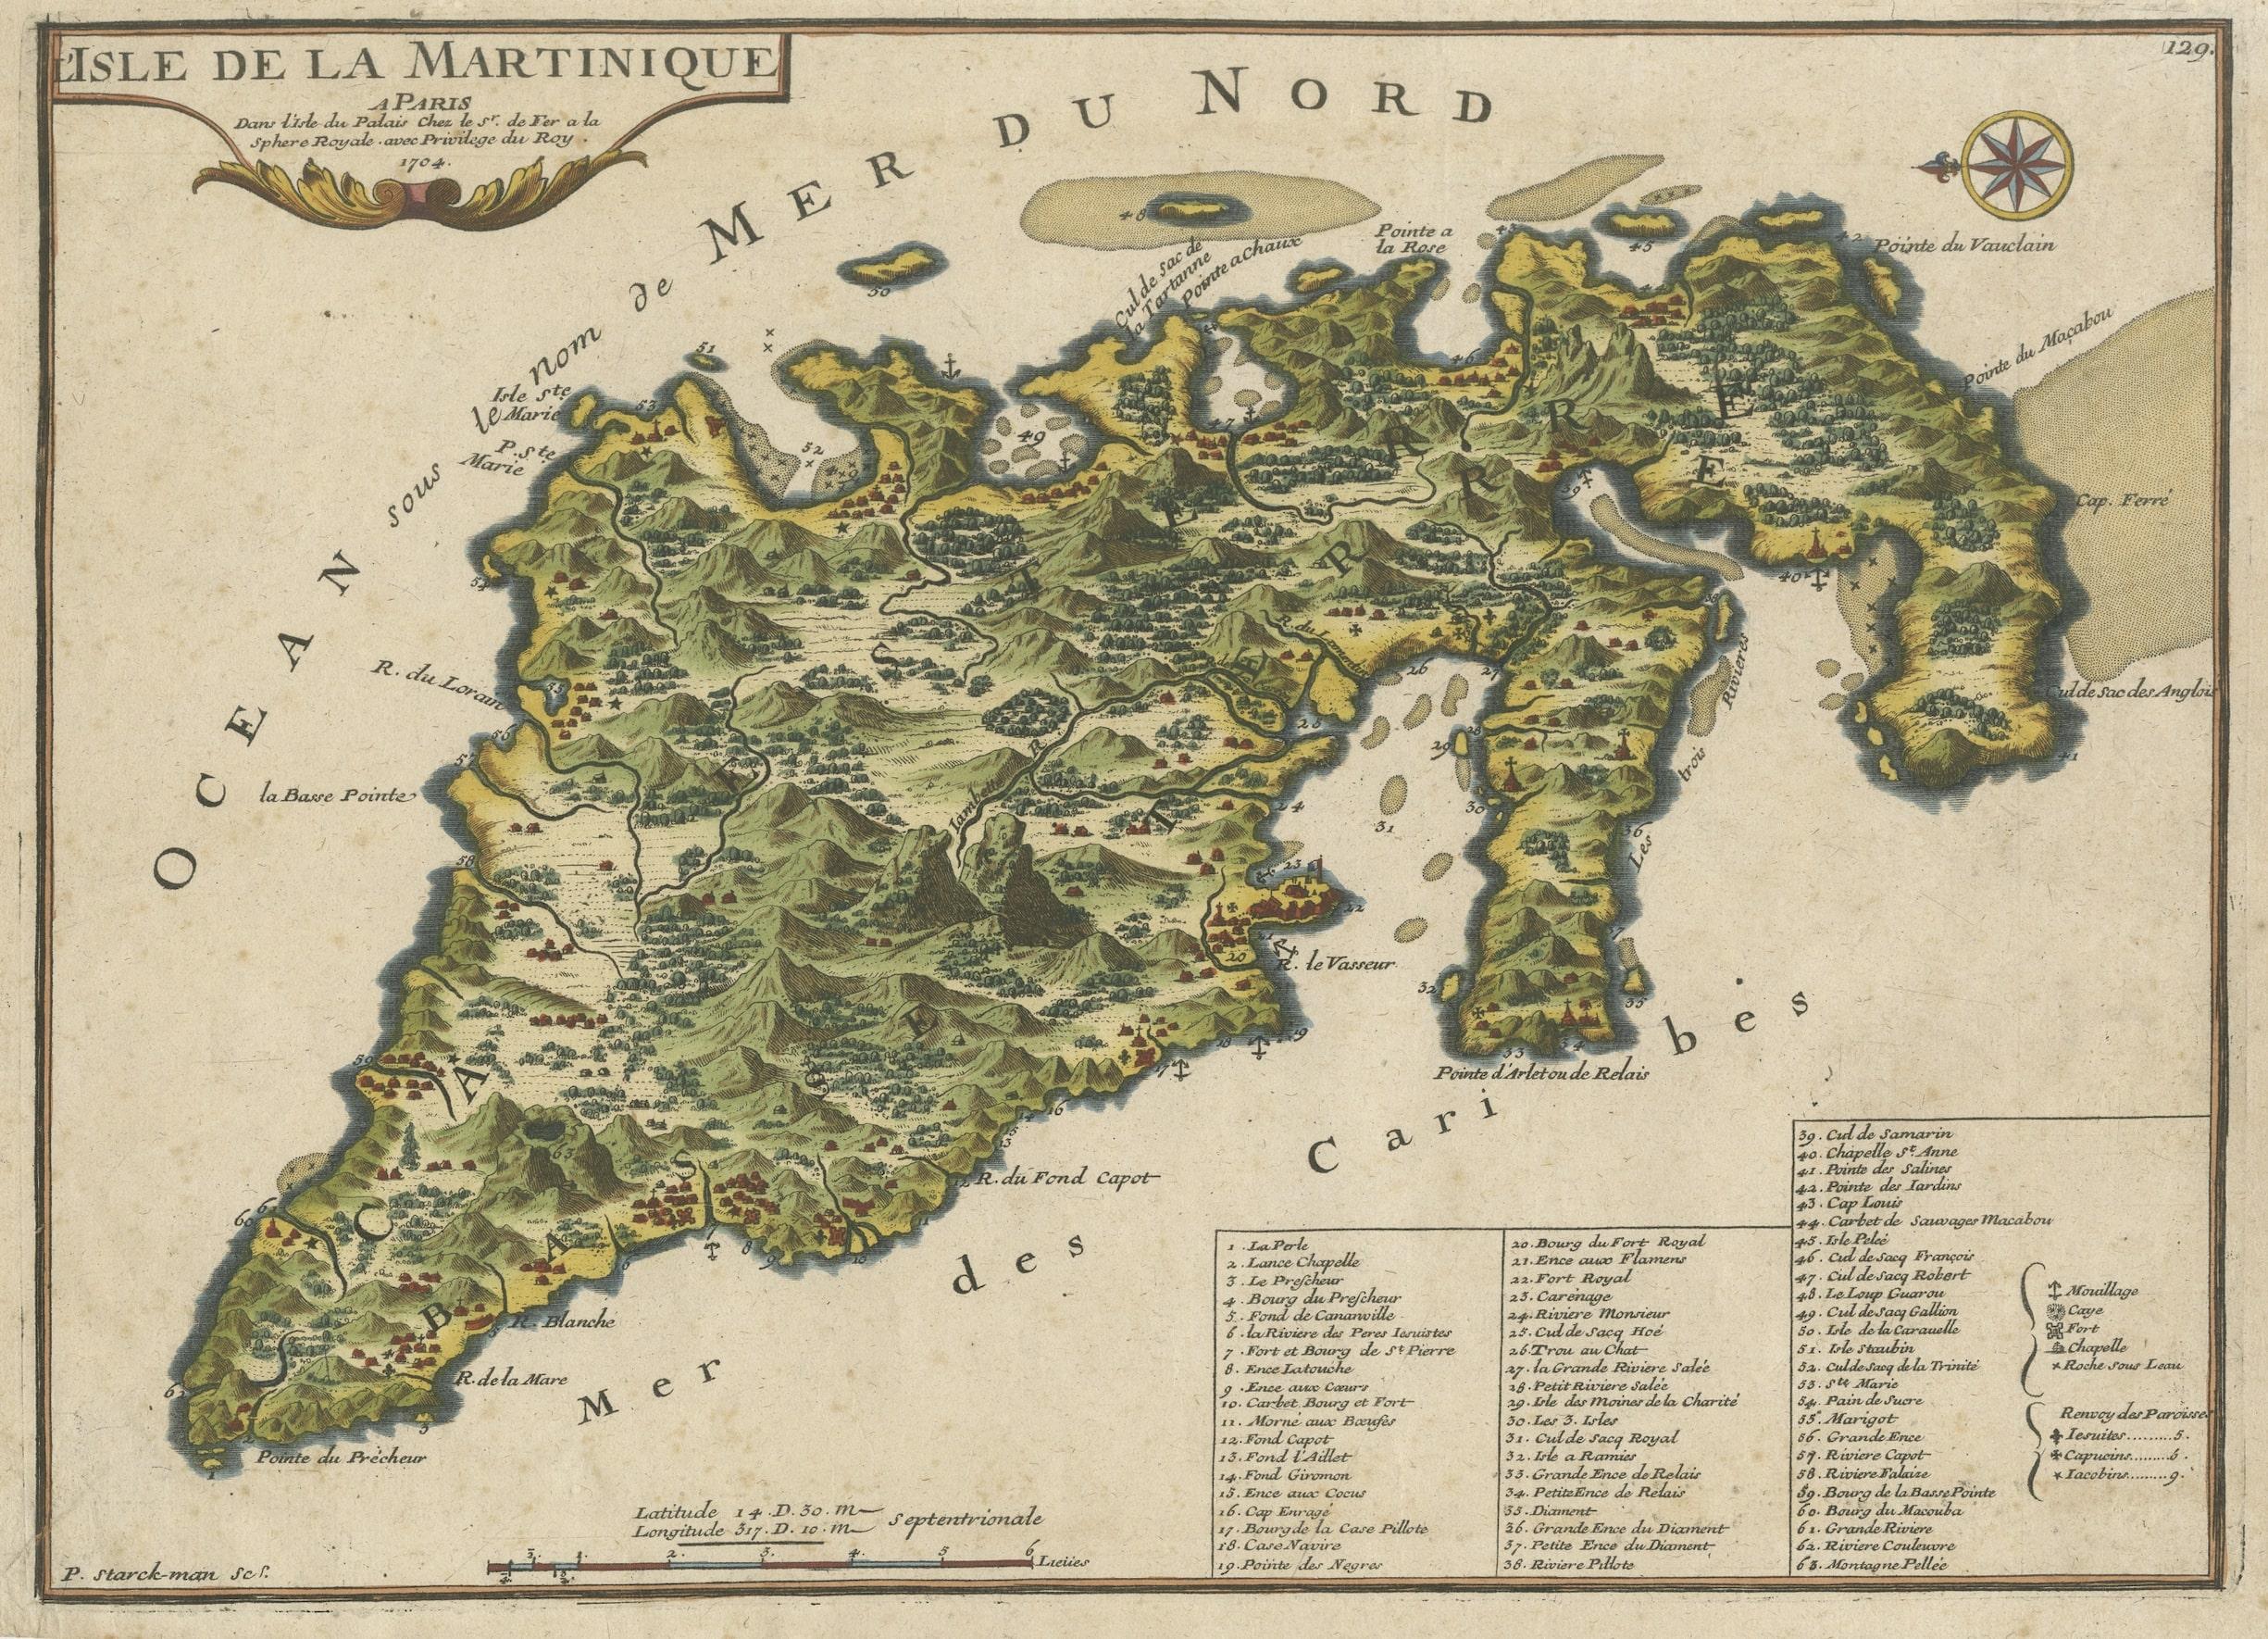 The original hand-colored map titled 